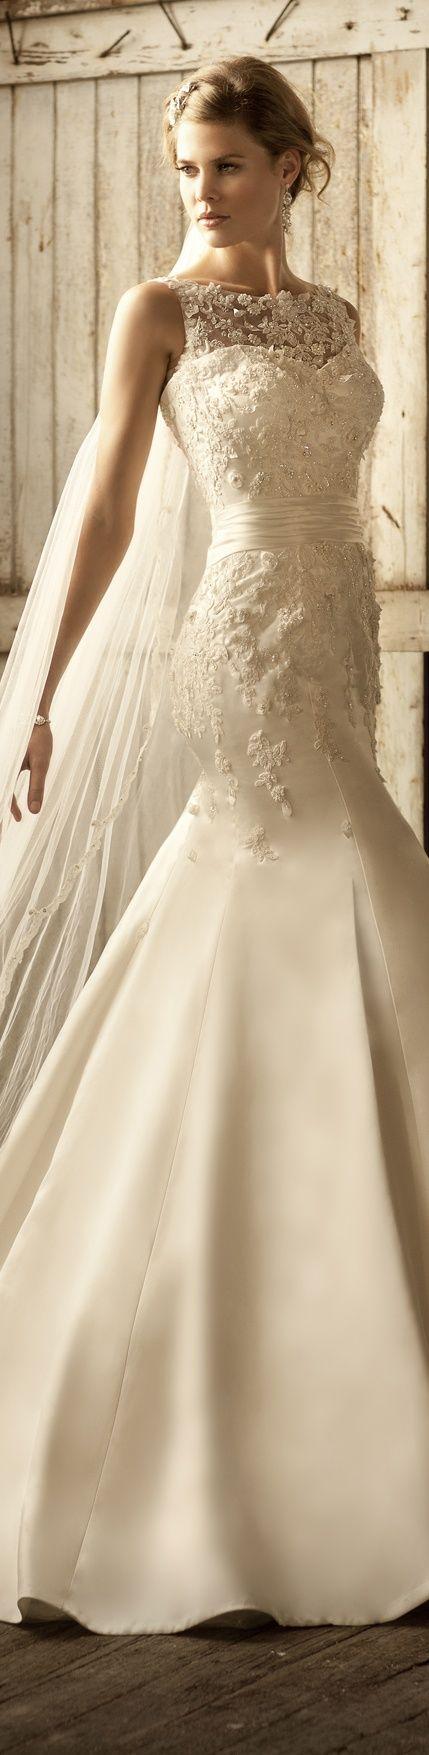 Mariage - Best Beautiful Wedding Dresses For 2015